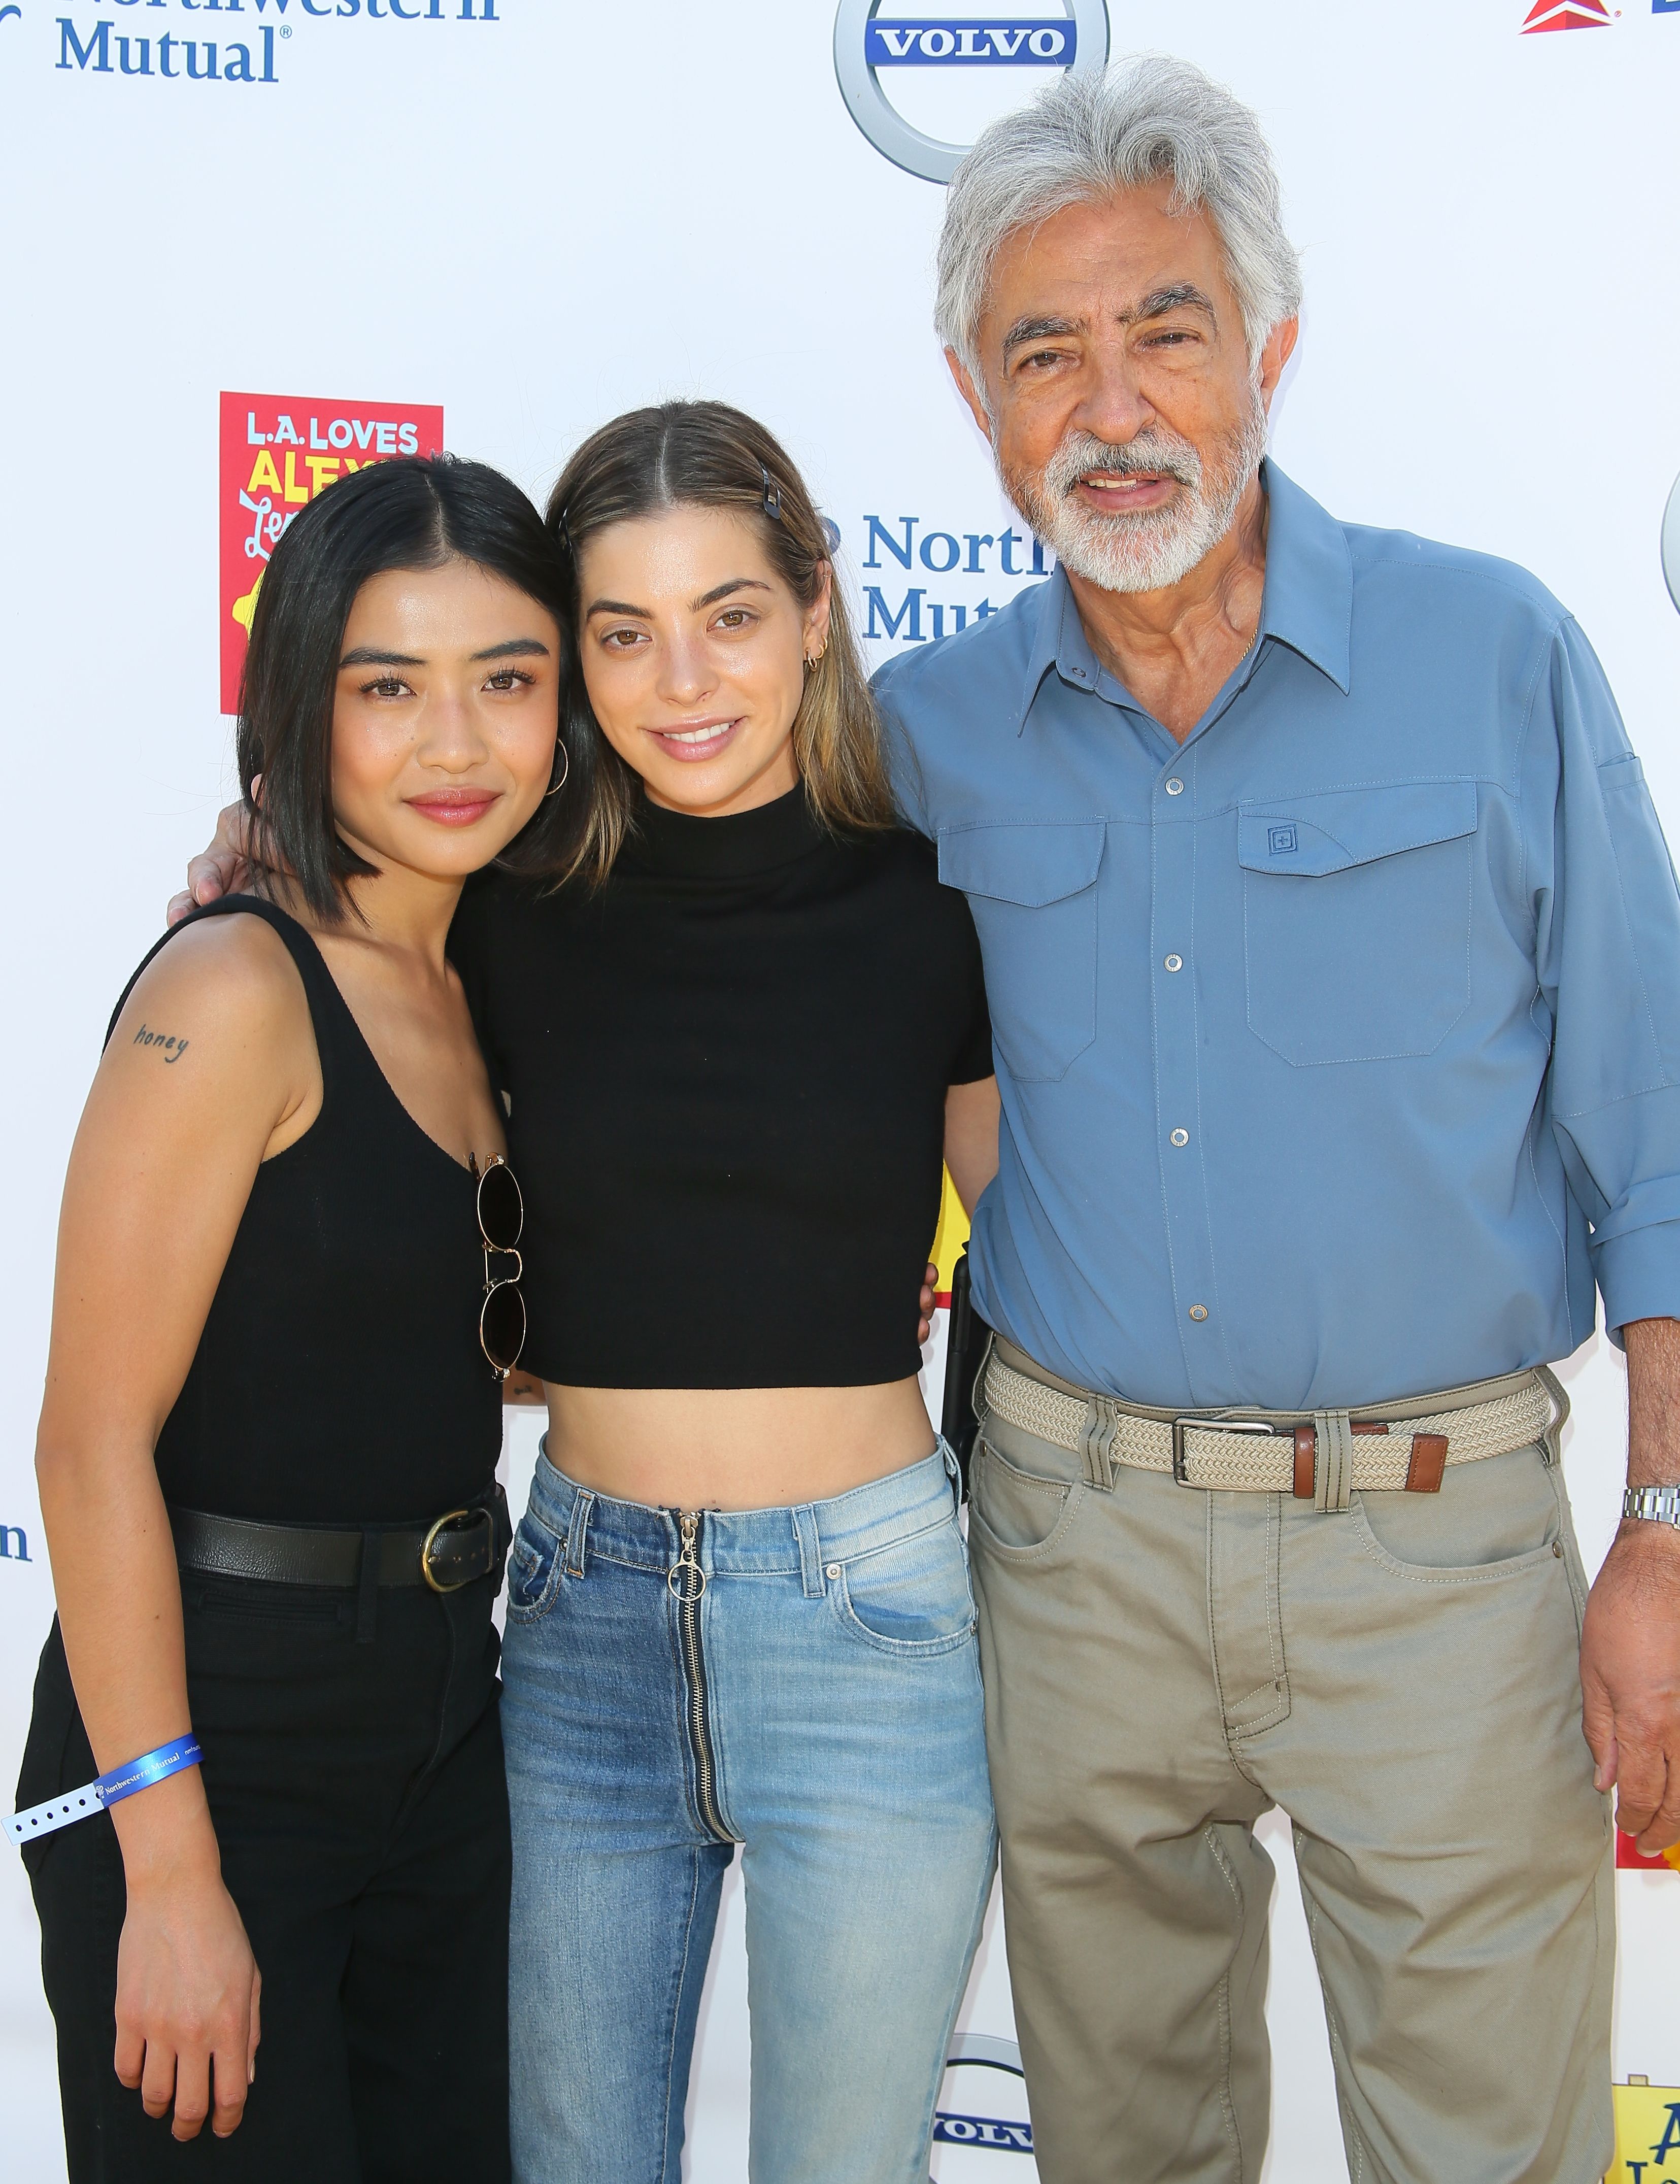 Brianne Tju, Gia Mantegna and Joe Mantegna during the L.A. Loves Alex's Lemonade 2019 at UCLA Royce Quad on September 14, 2019 in Los Angeles, California. | Source: Getty Images